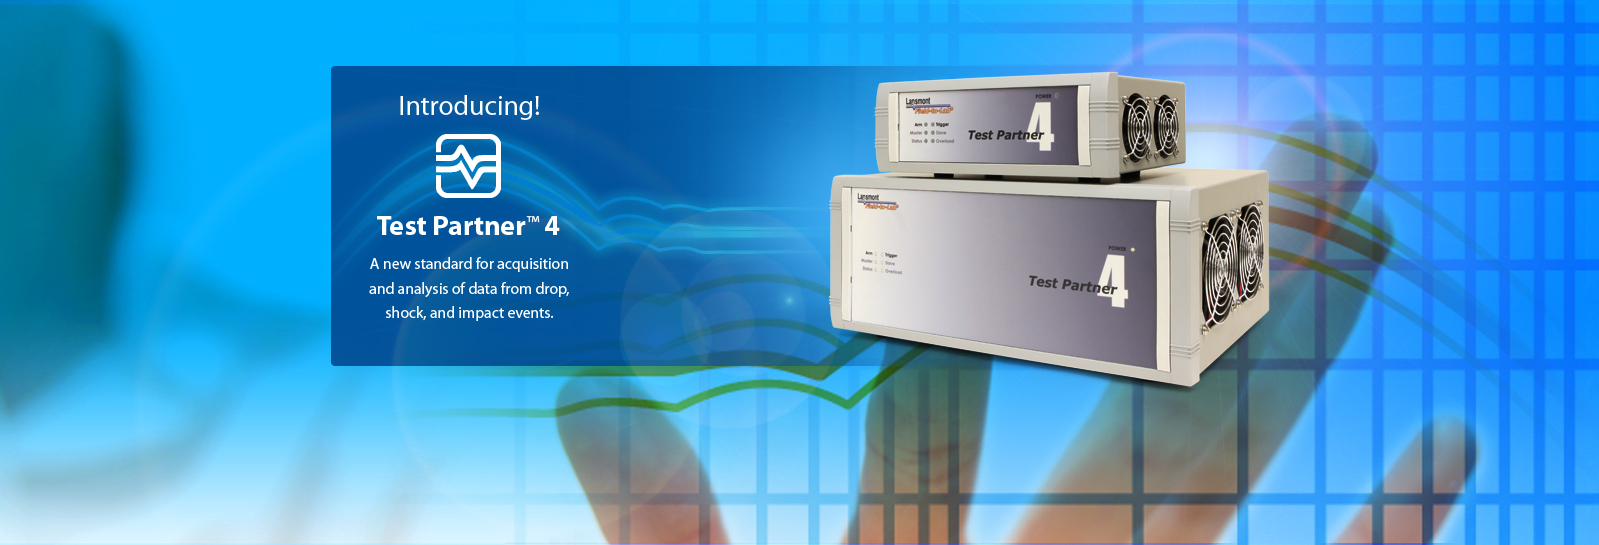 Introducing the Test Partner™ 4 data acquisition system.